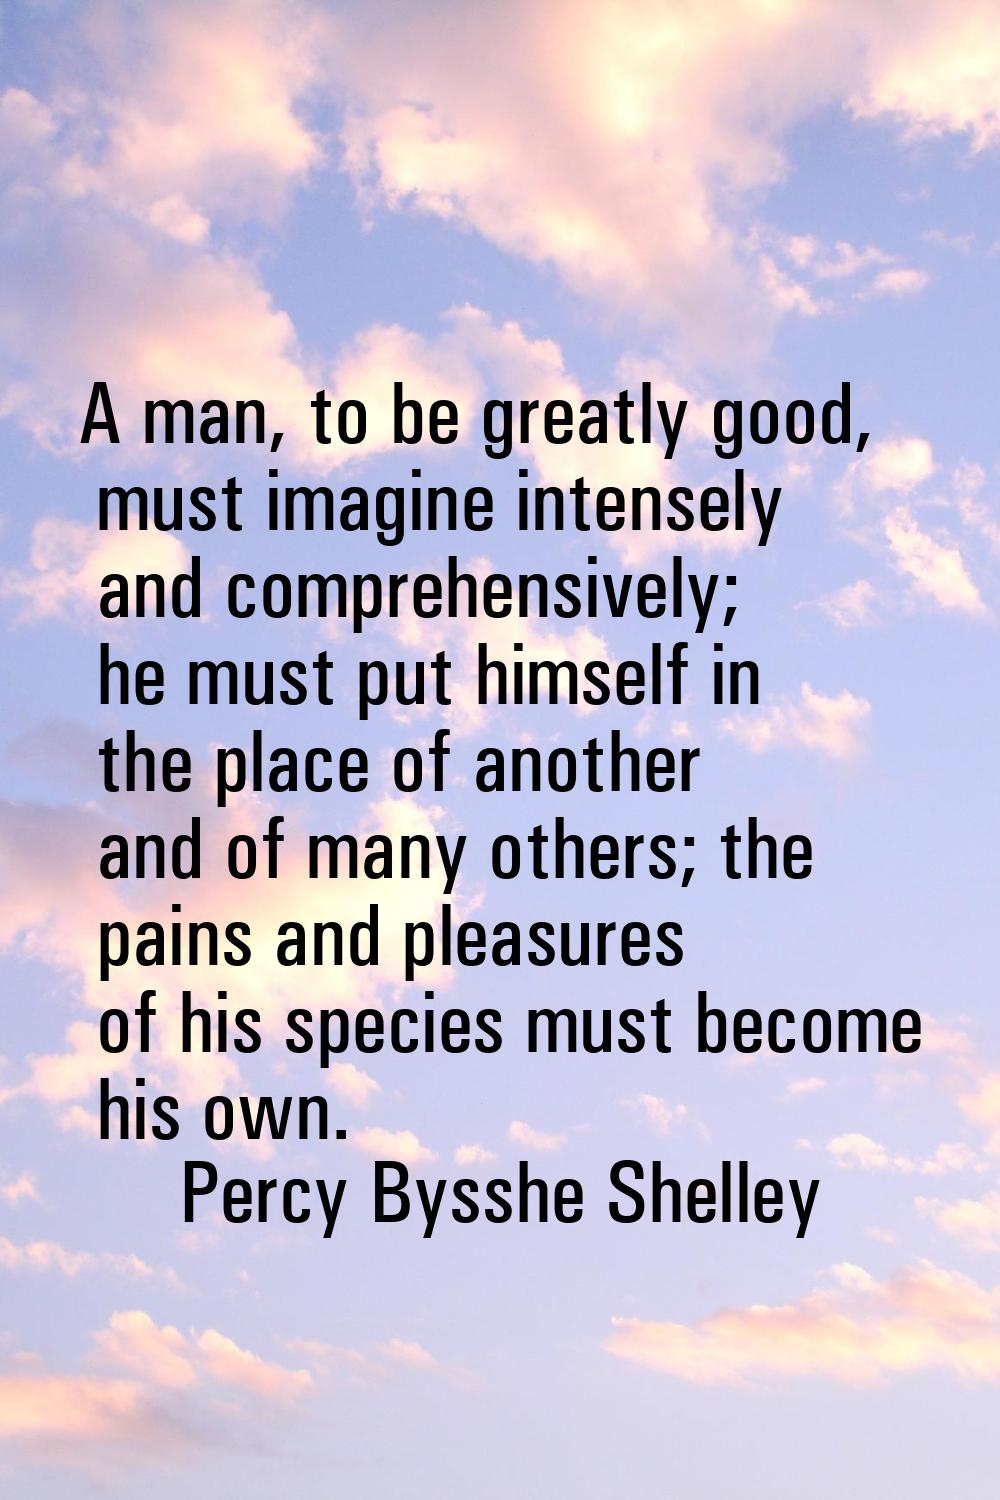 A man, to be greatly good, must imagine intensely and comprehensively; he must put himself in the p